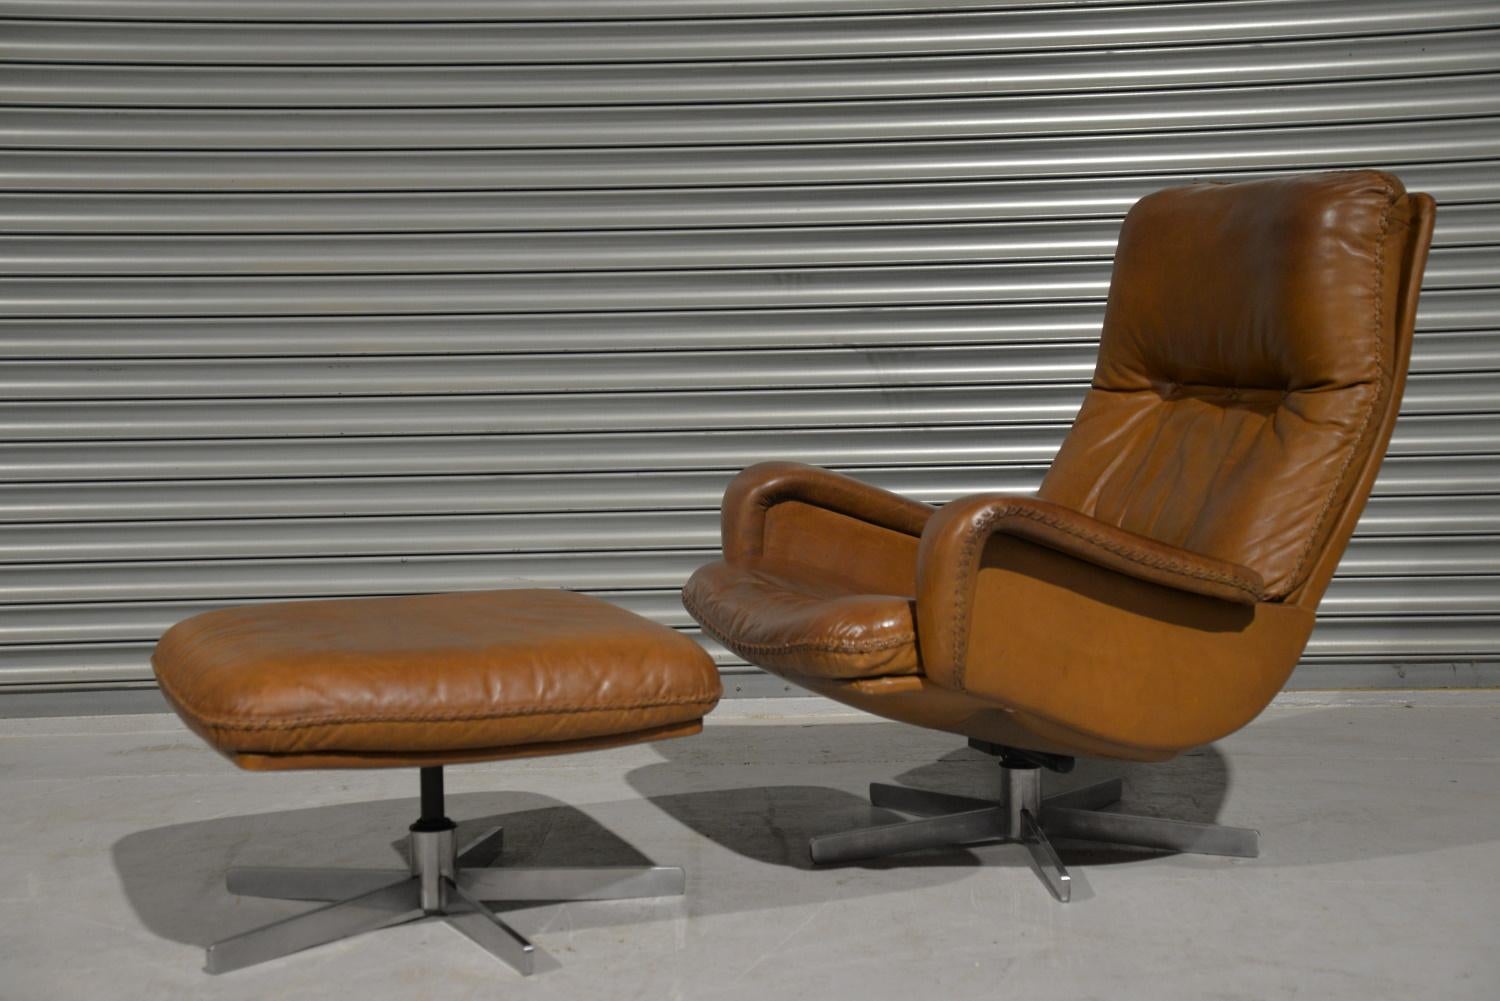 We are delighted to bring to you an ultra-rare and highly desirable original de Sede S 231 vintage lounge swivel armchair and ottoman. Built in the late 1960s by De Sede craftsman from Switzerland this same chair was used as a prop in the 1969 James